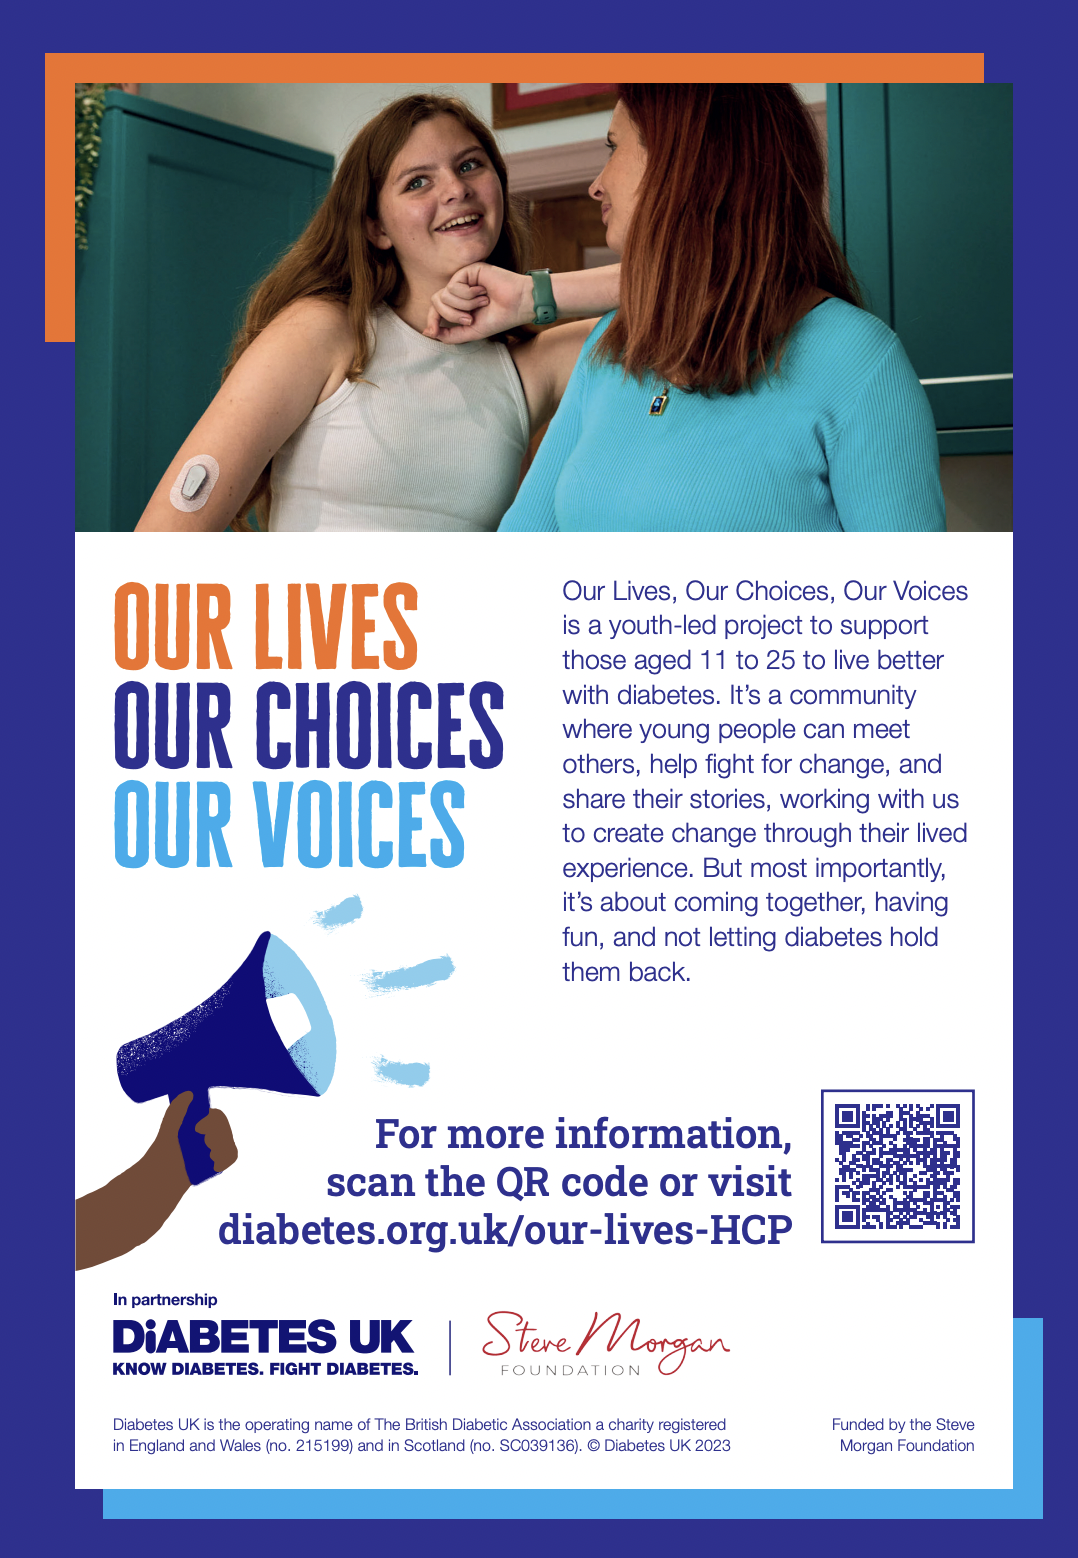 Diabetes UK: Our Lives, Our Choices, Our Voices